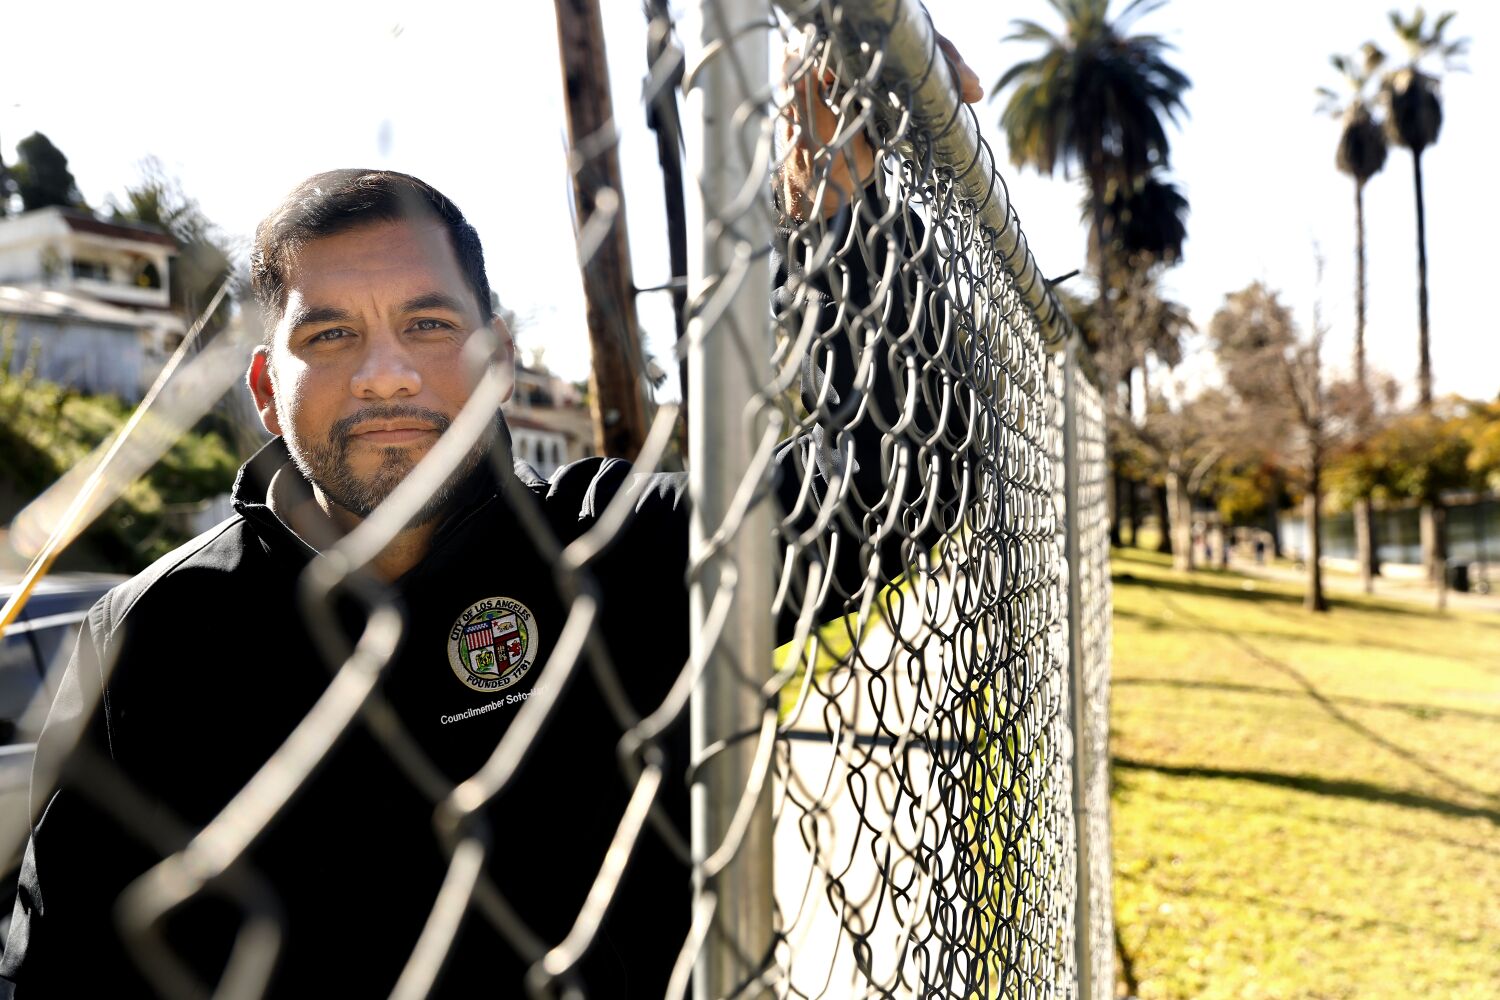 The fence around Echo Park Lake is coming down. The debate over it rages on